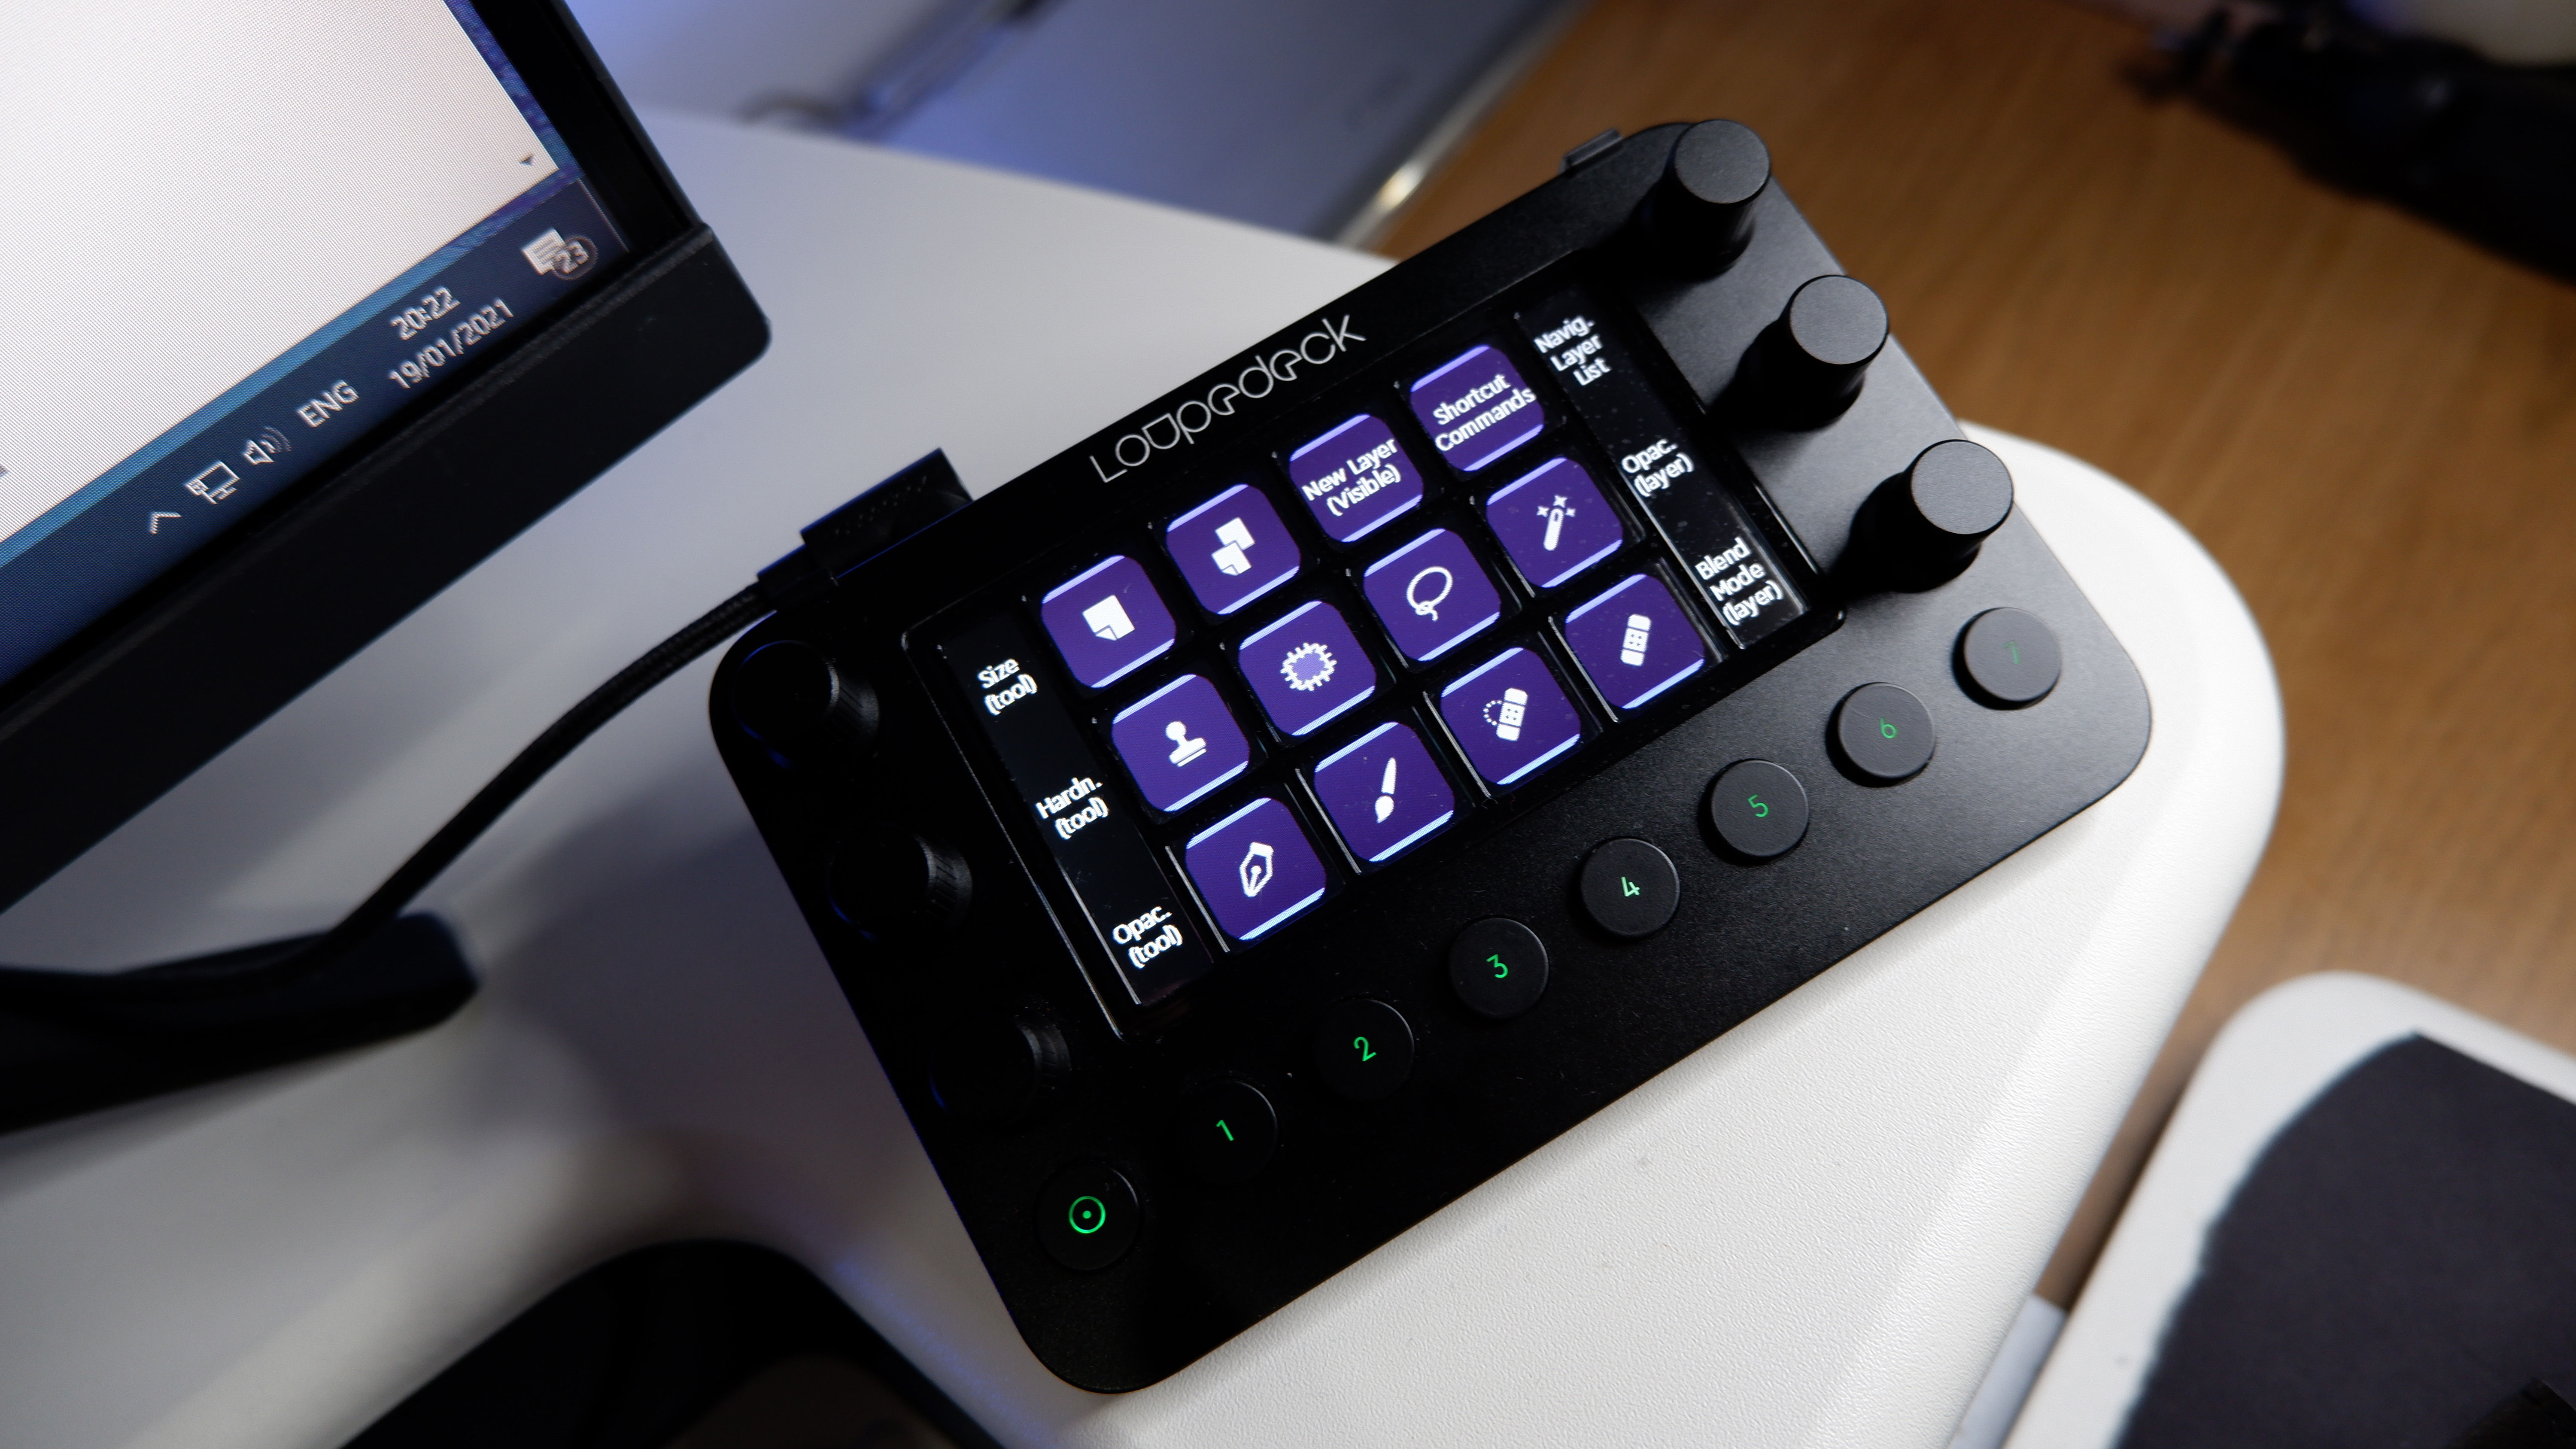 The Loupedeck Live S is an Easy and Affordable Streaming Controller